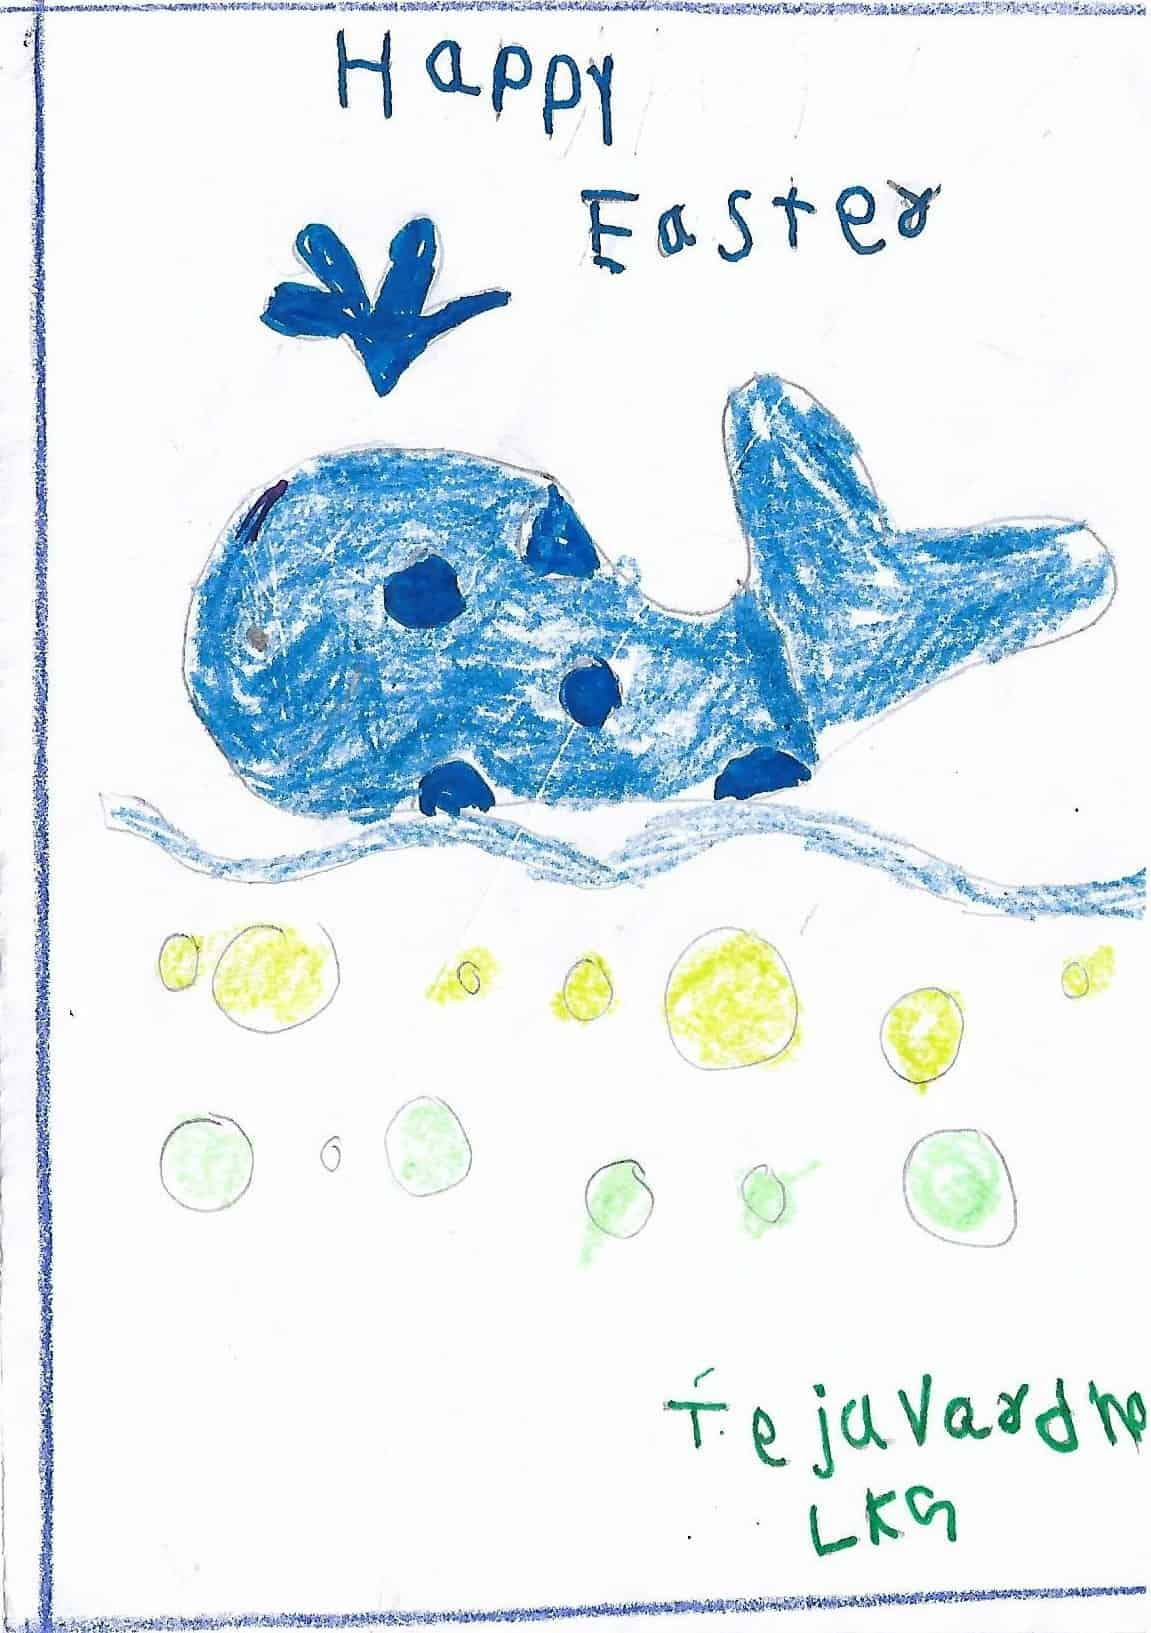 Child's drawing of a whale with Happy Easter